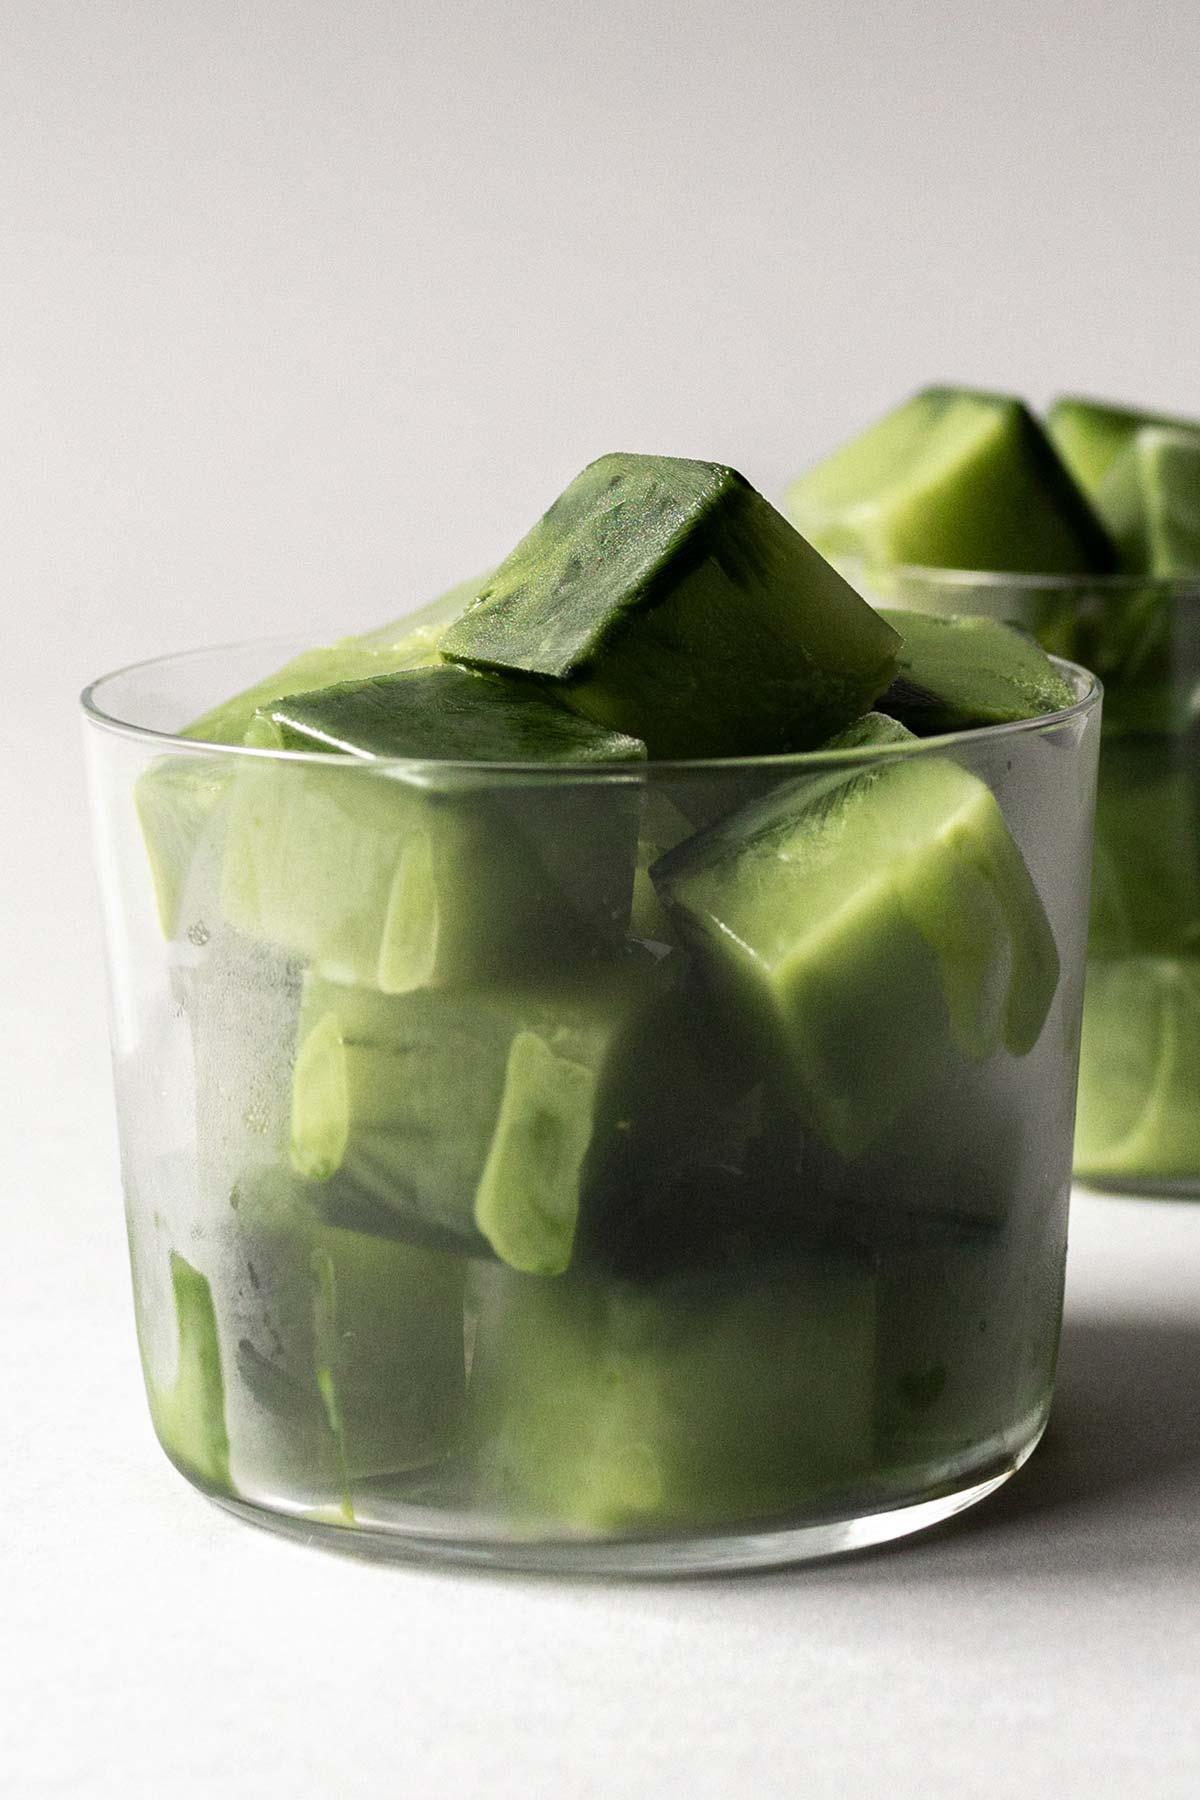 Matcha green tea ice cubes in glass cups.